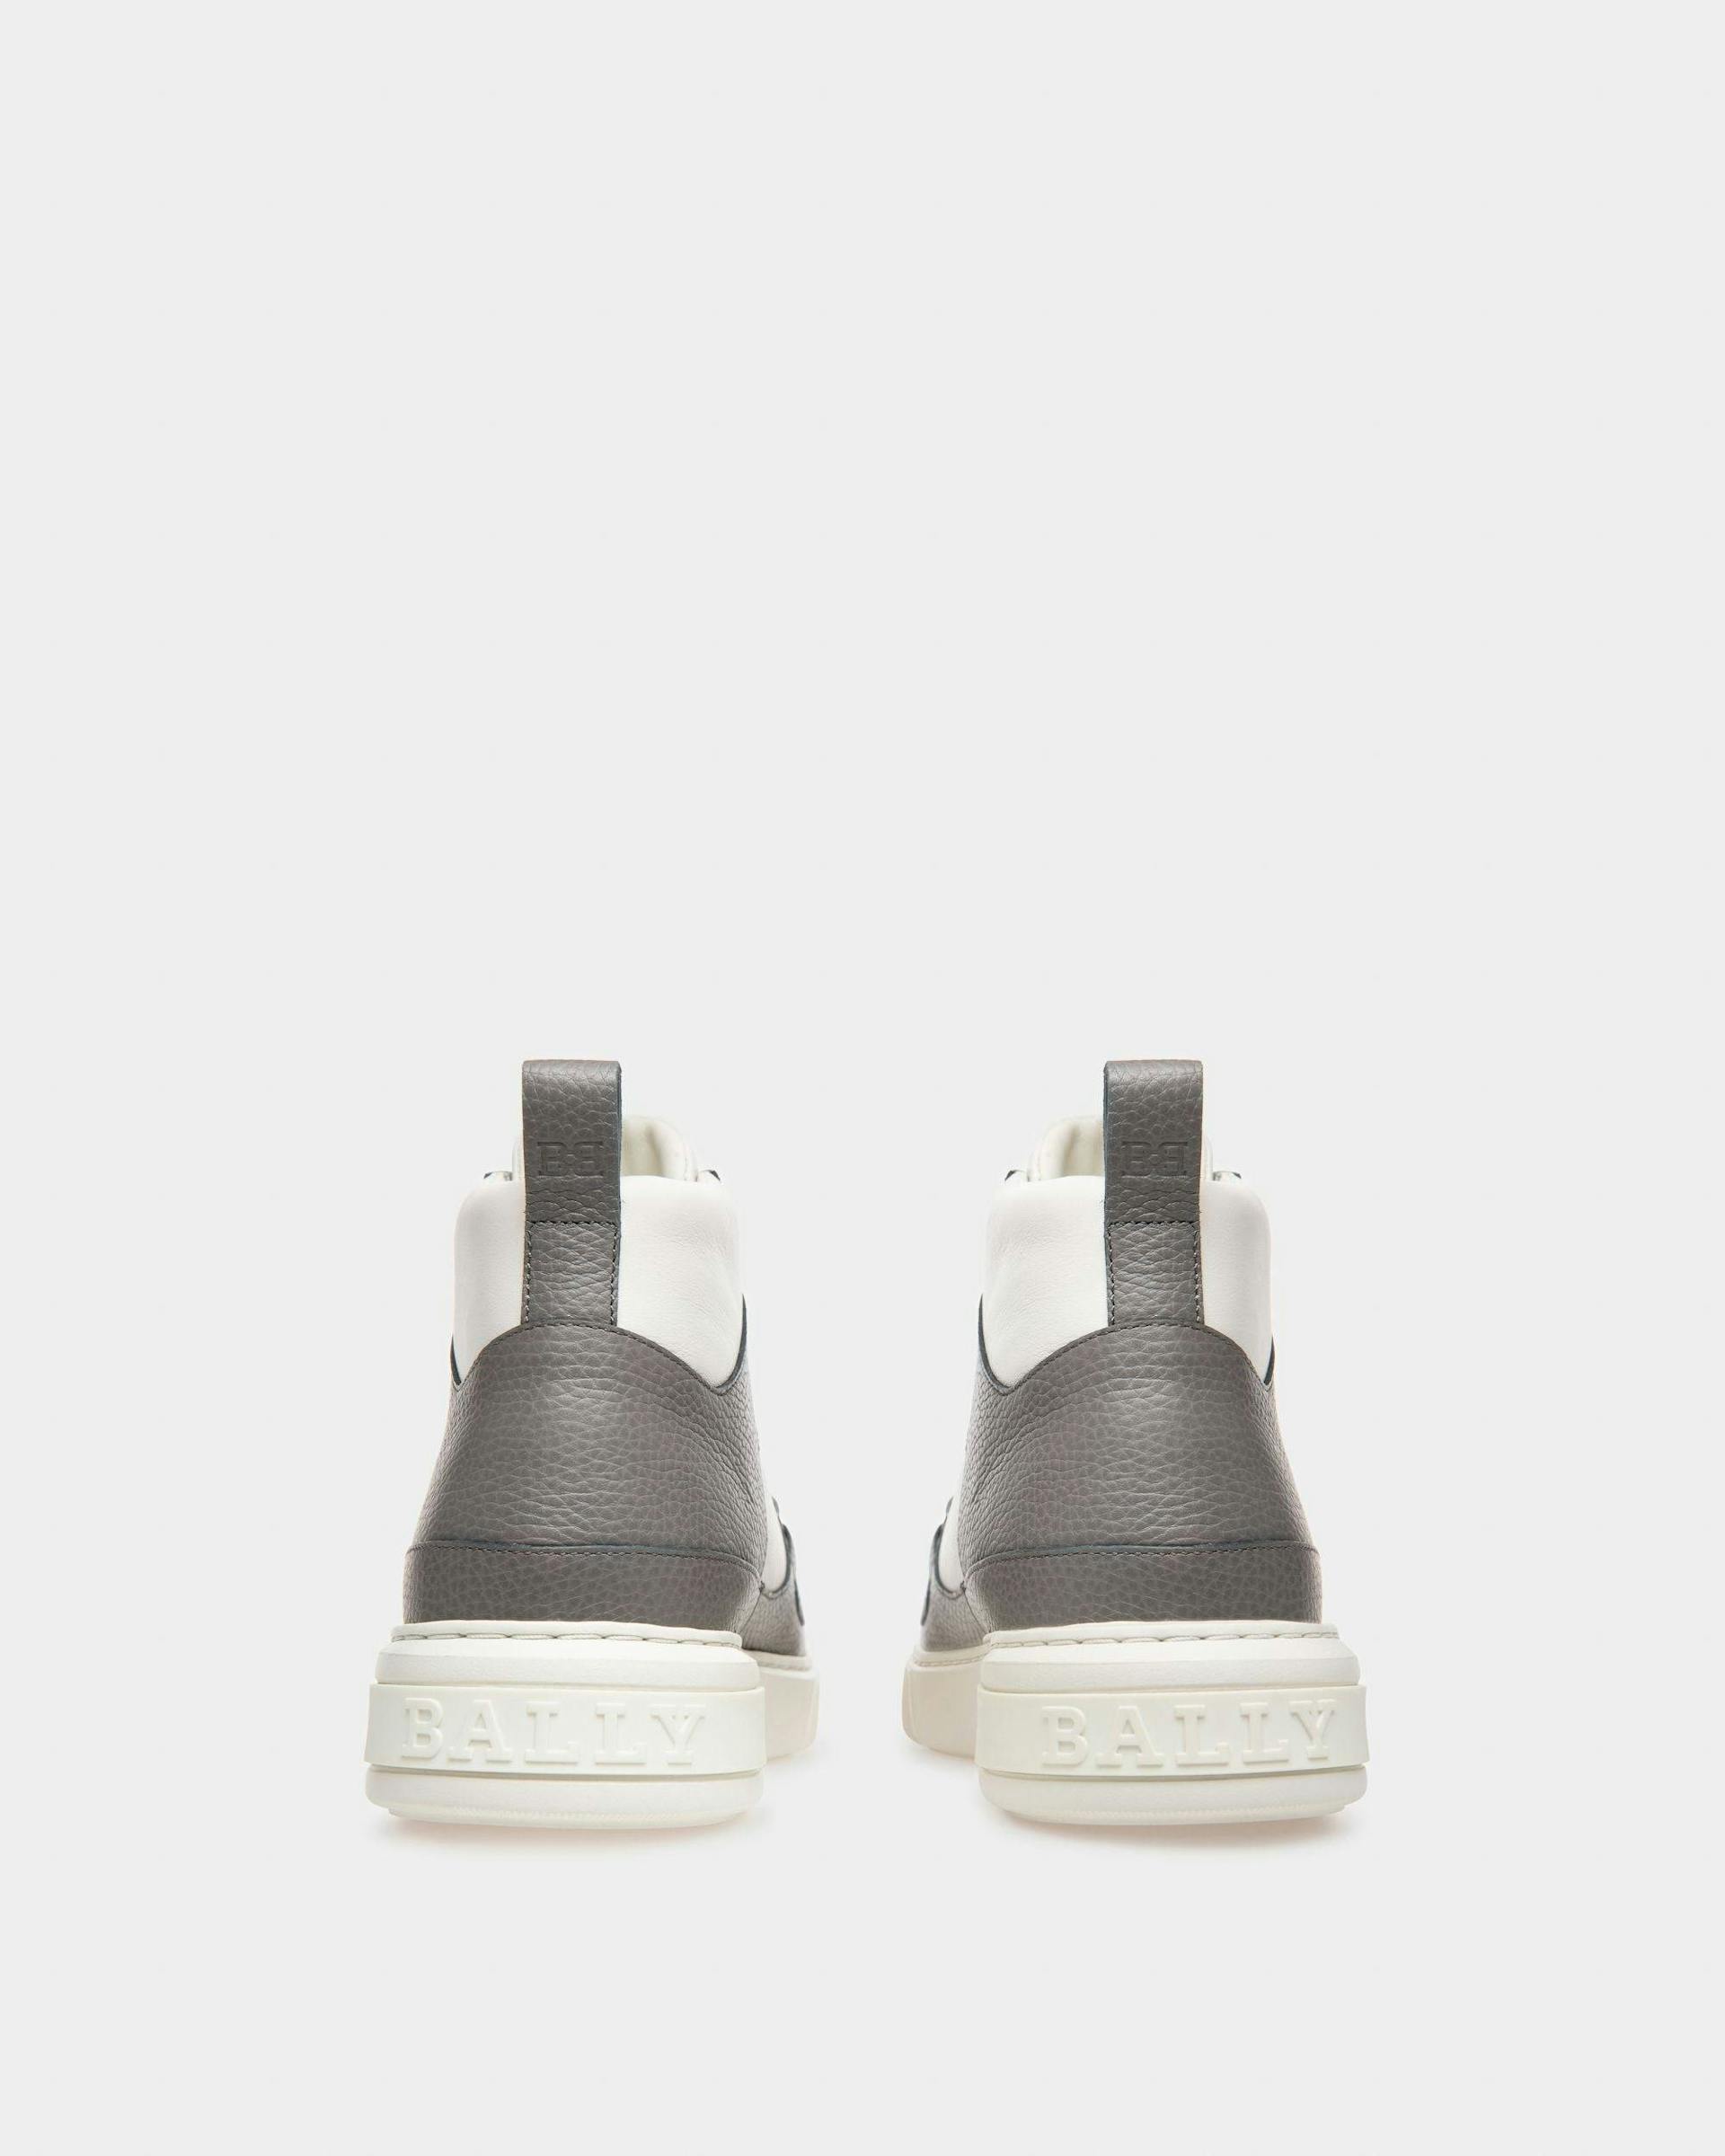 Merryk Leather Sneakers In Grey And White - Men's - Bally - 04